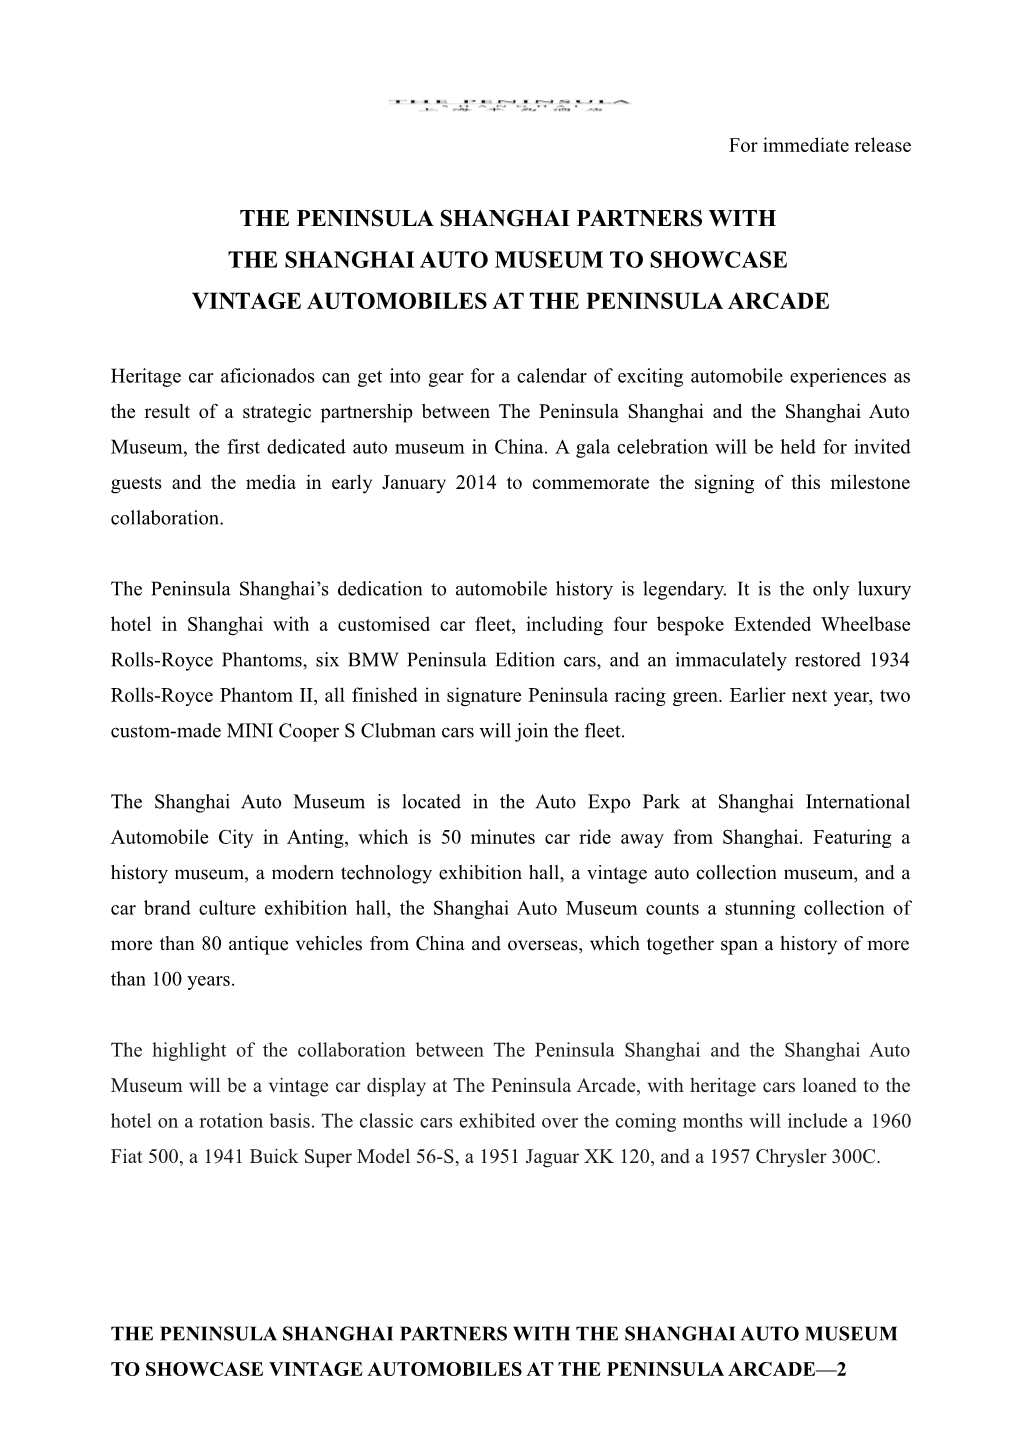 The Peninsula Shanghai Partners With